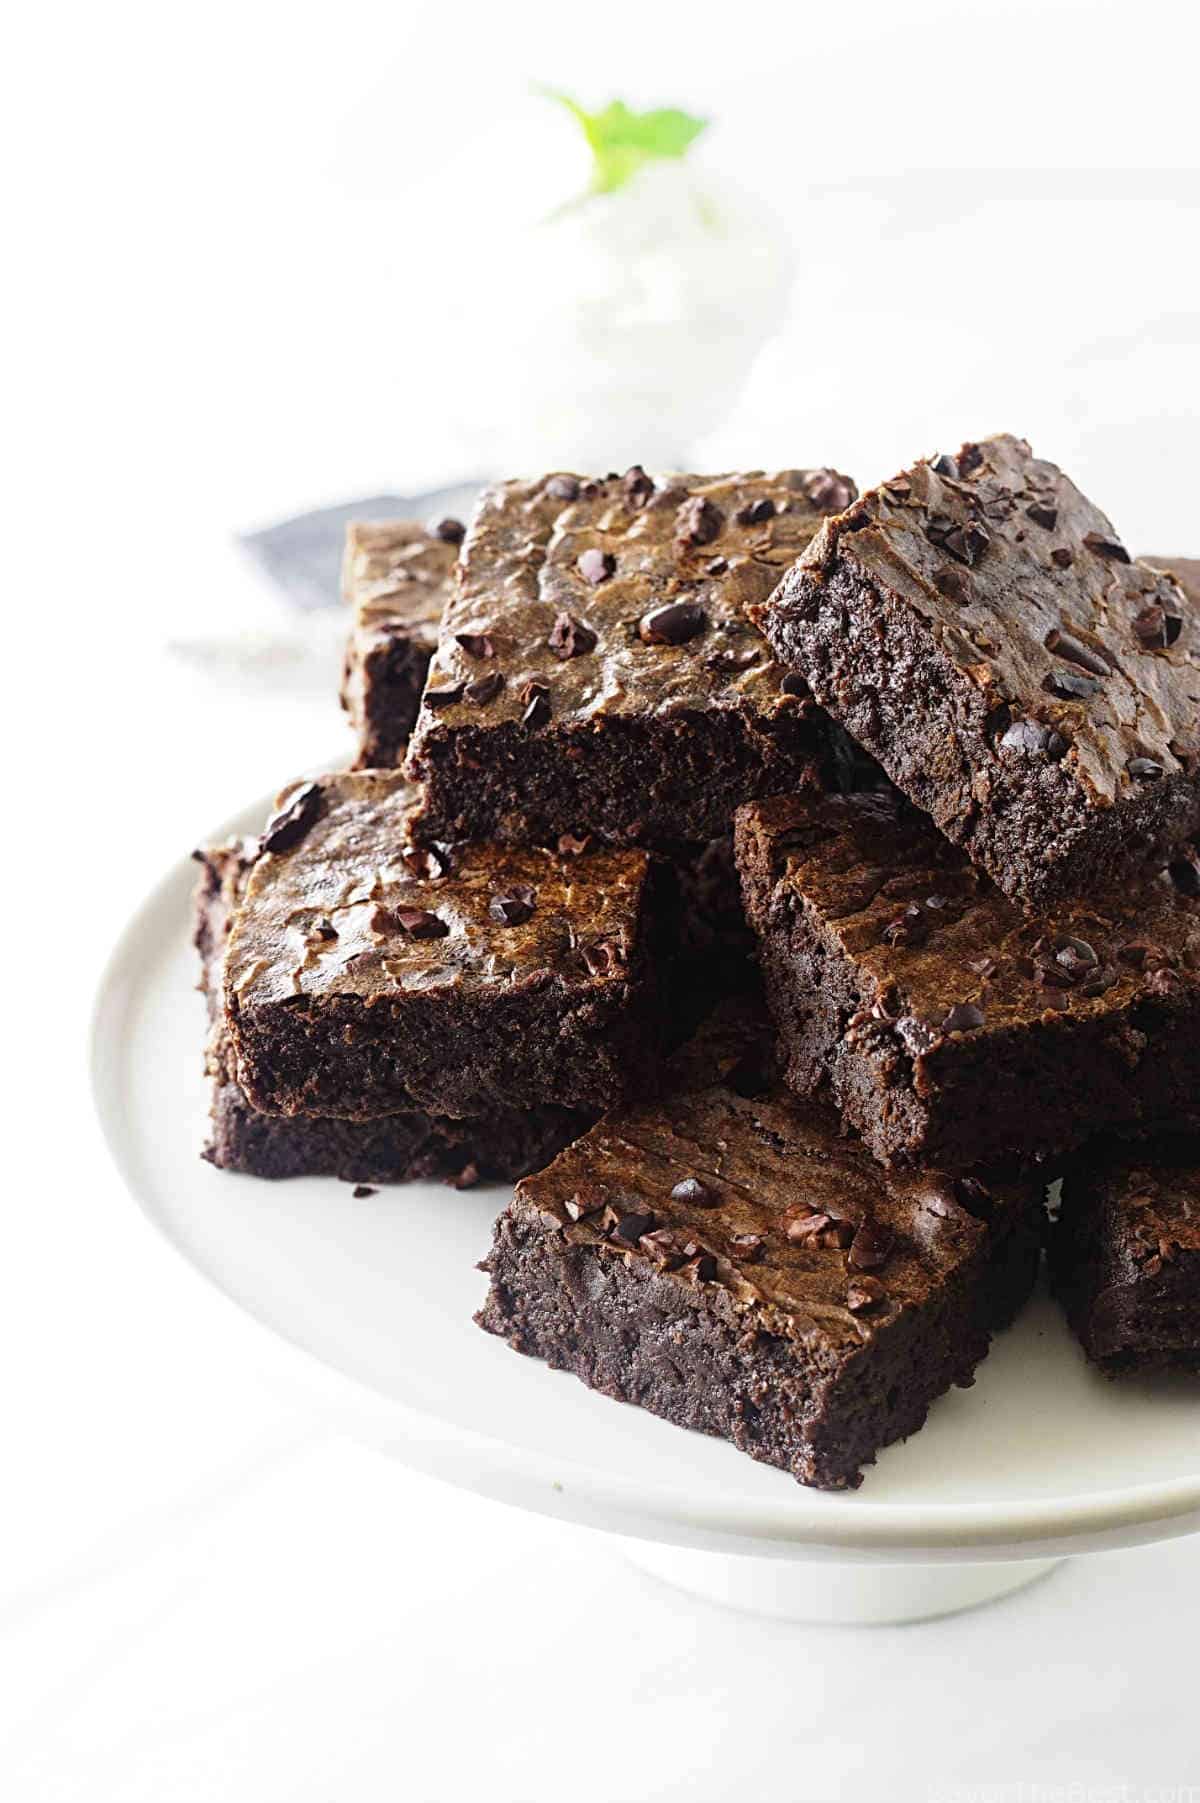 These fudgy brownies with cocoa nibs are made with the ancient grain Einkorn flour. They are fudgy delicious and the cocoa nibs are crisp and crunchy.